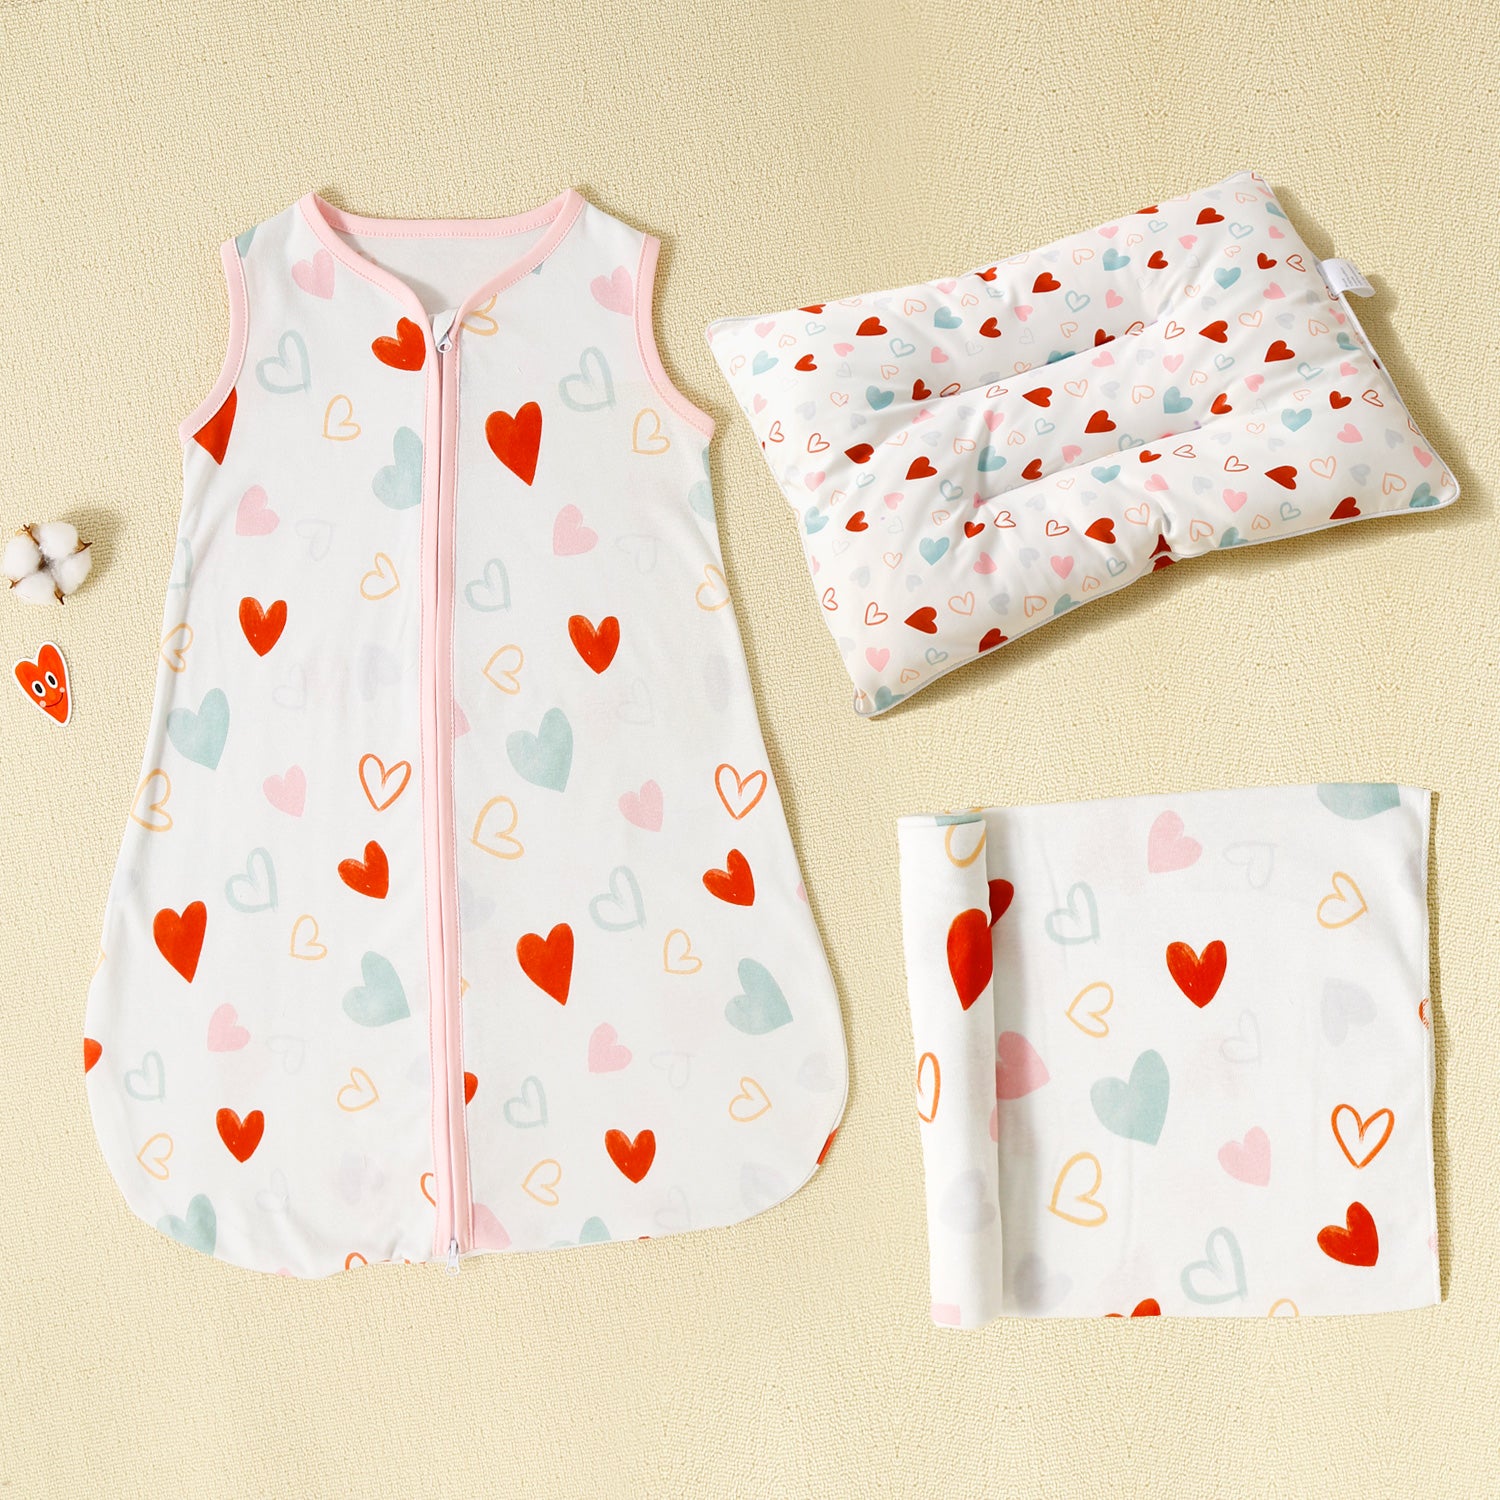 100% Cotton Colorful Heart Print Baby Sleeping Bag / Swaddling Blanket / Pillow